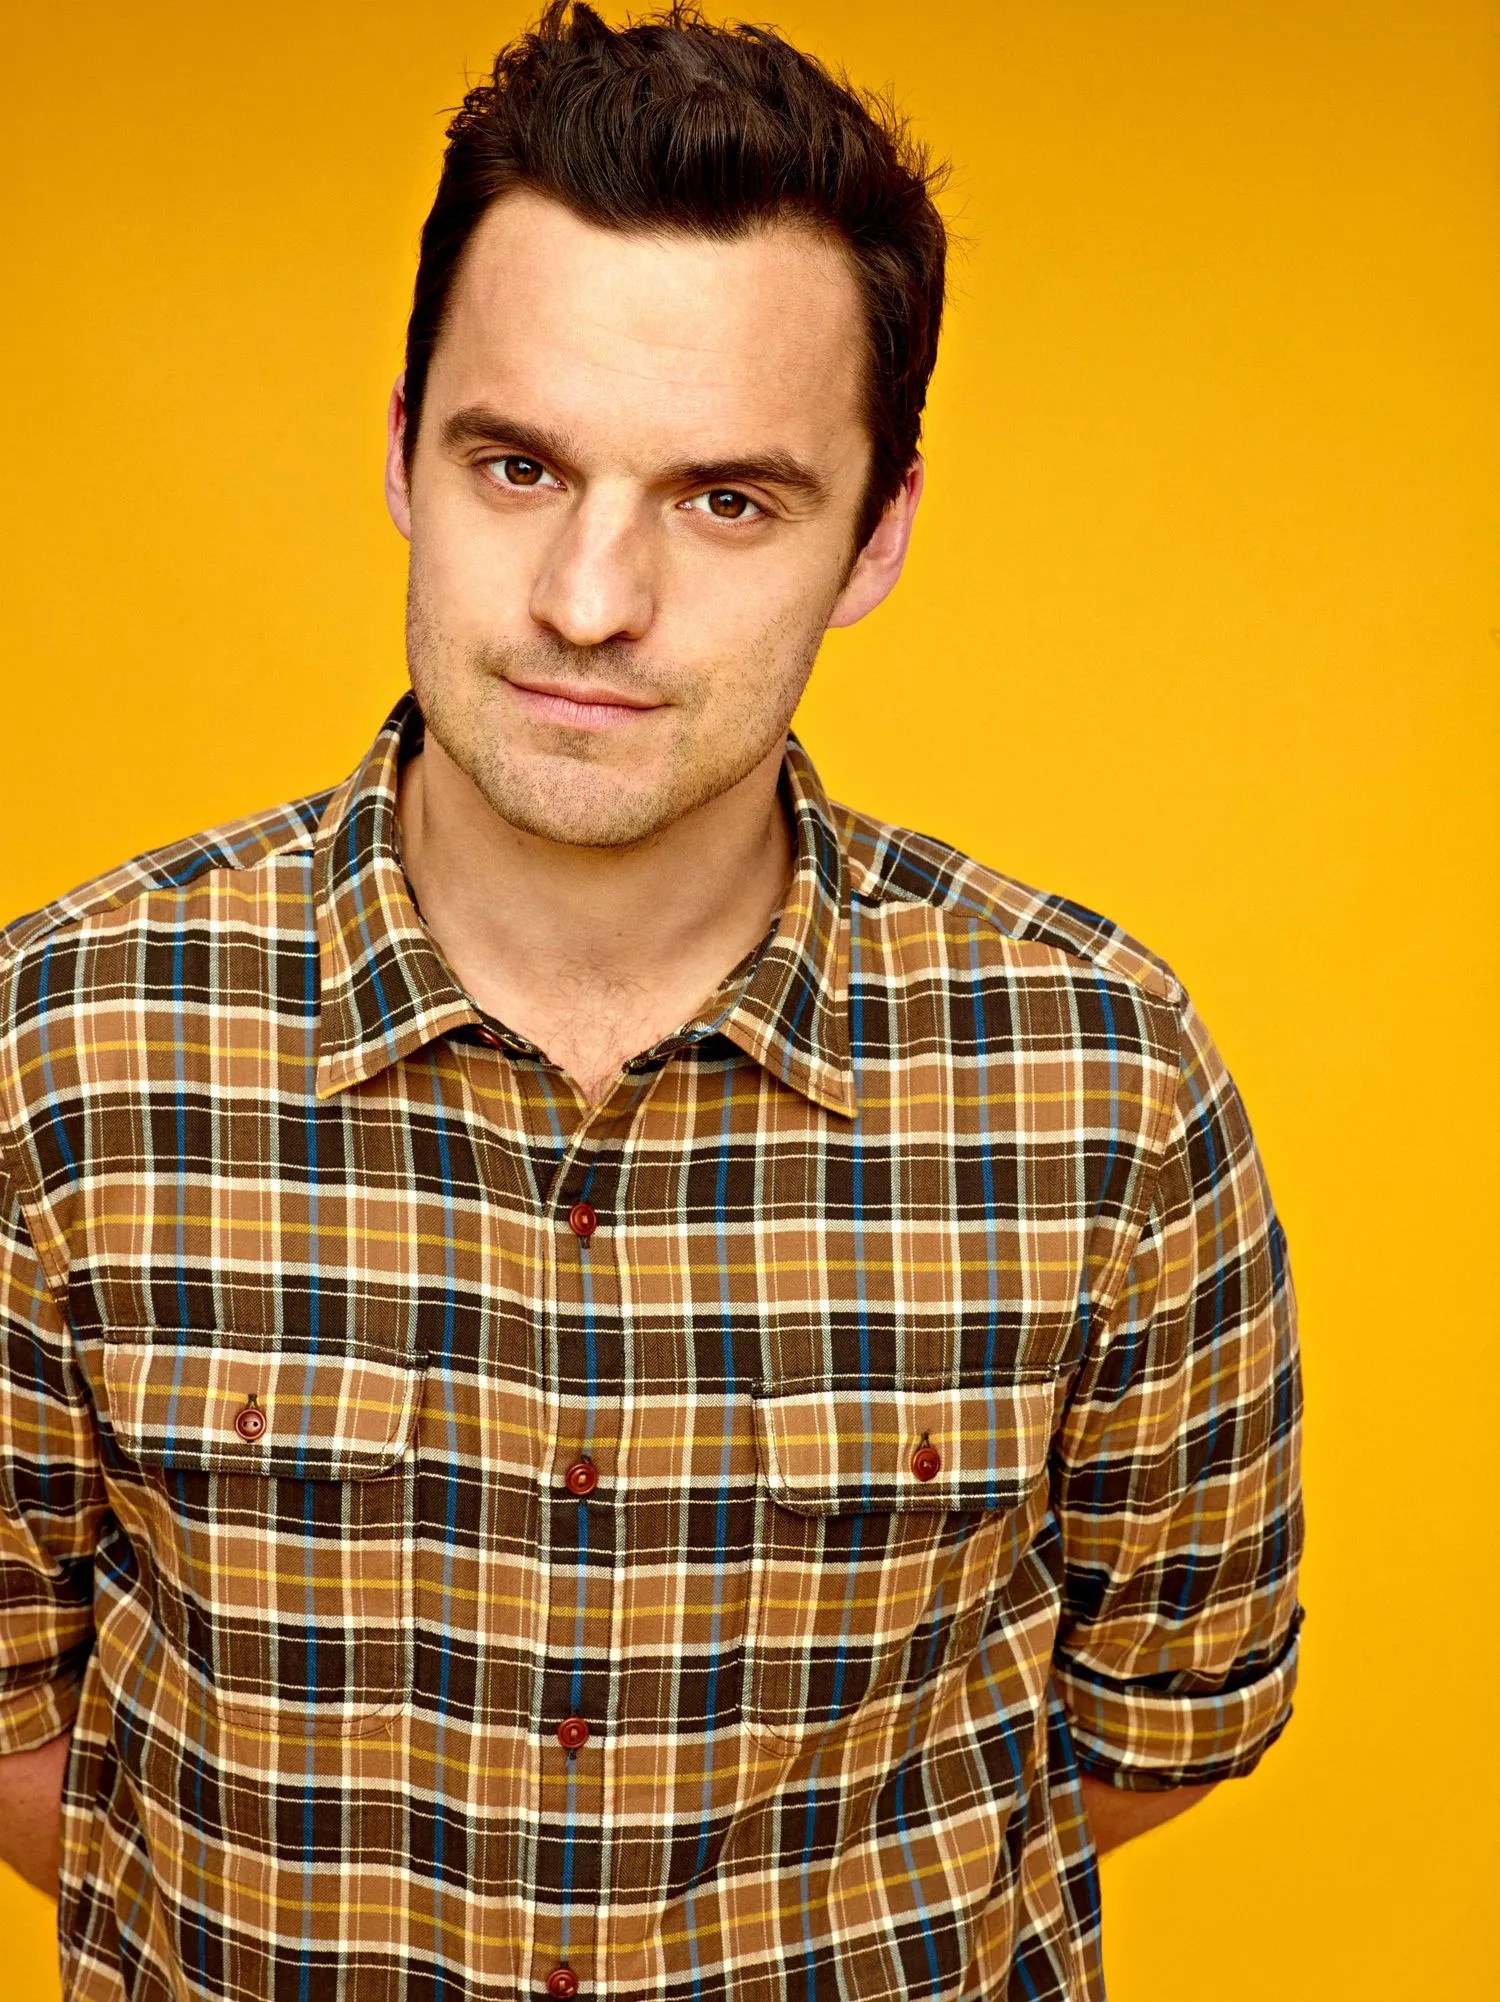 New Girl's Jake Johnson Talks Married Life, Drinking, and Partying at